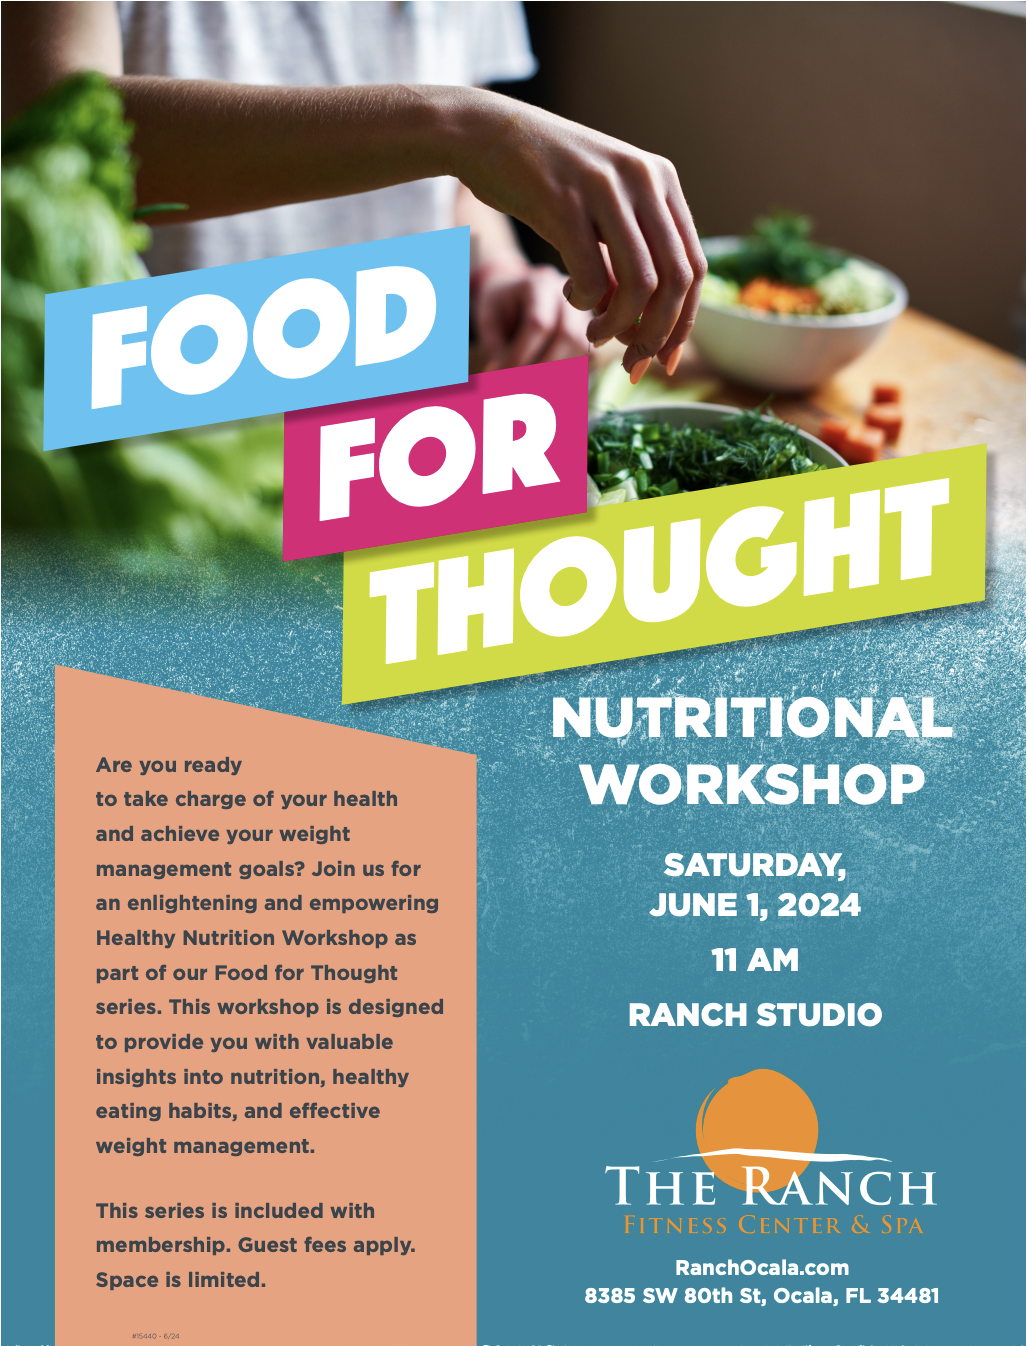 Food for Thought Nutritional Workshop at The Ranch.